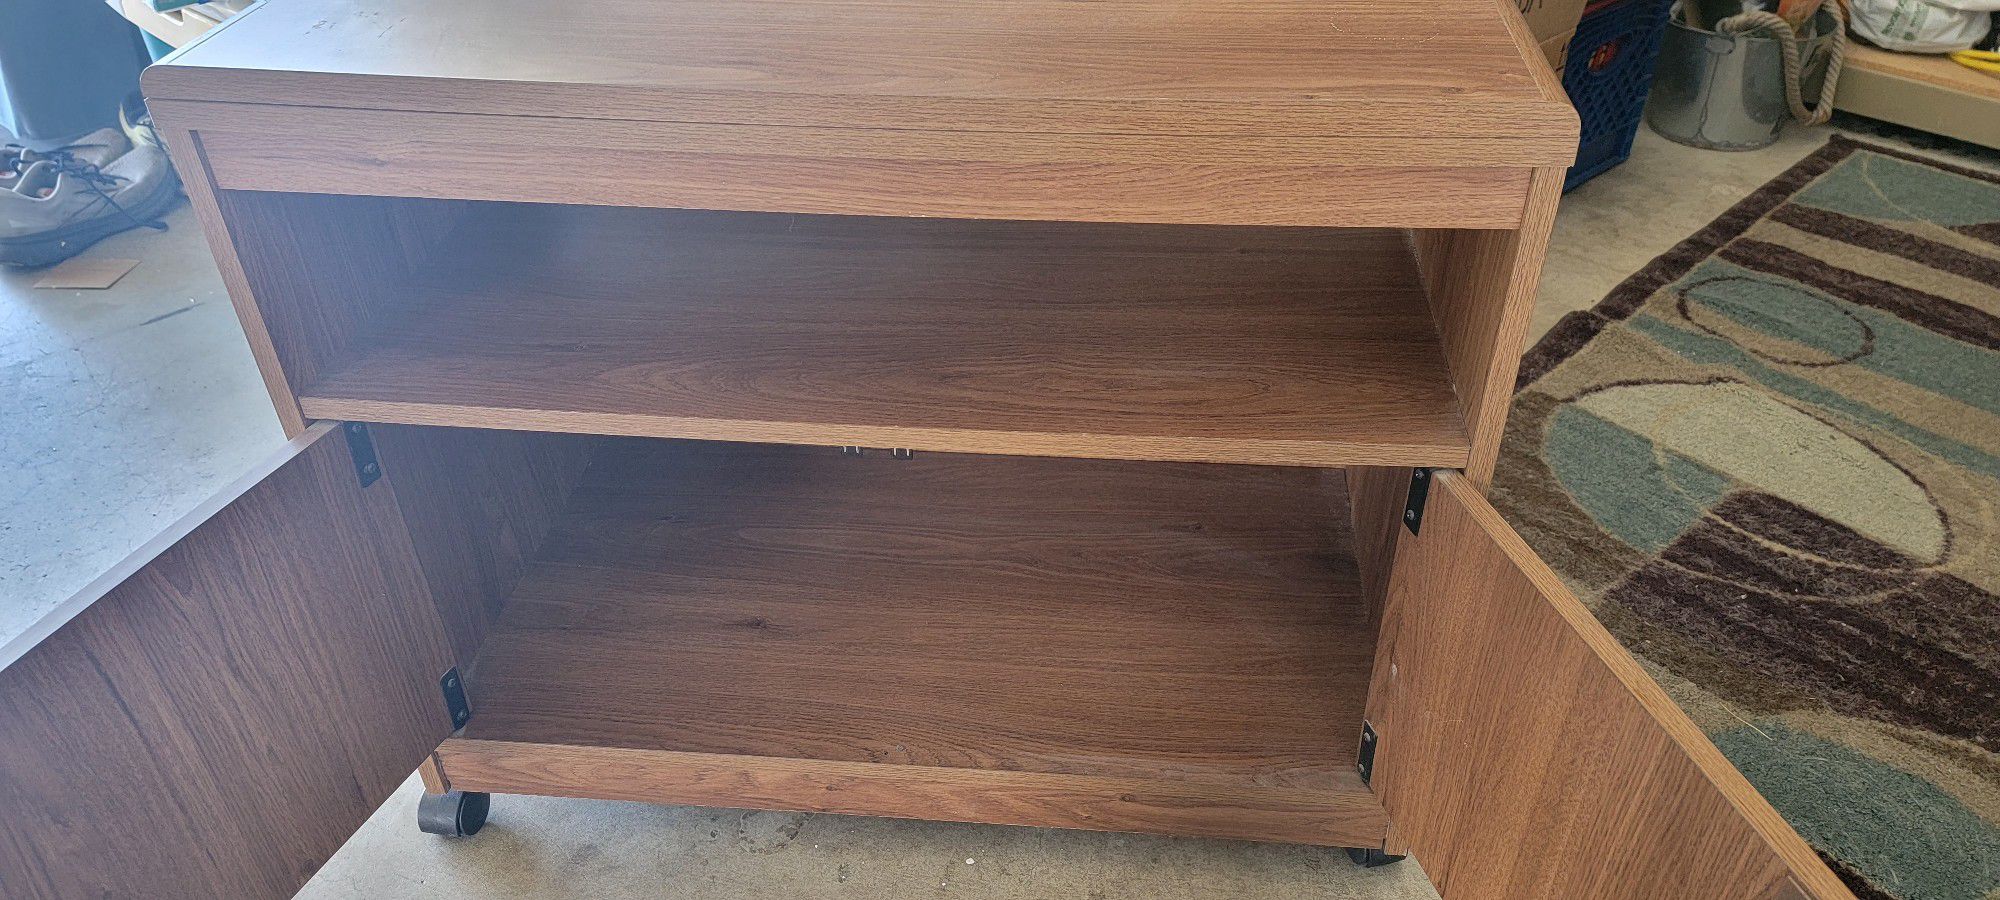 TV Stand w/swivel Top and Storage